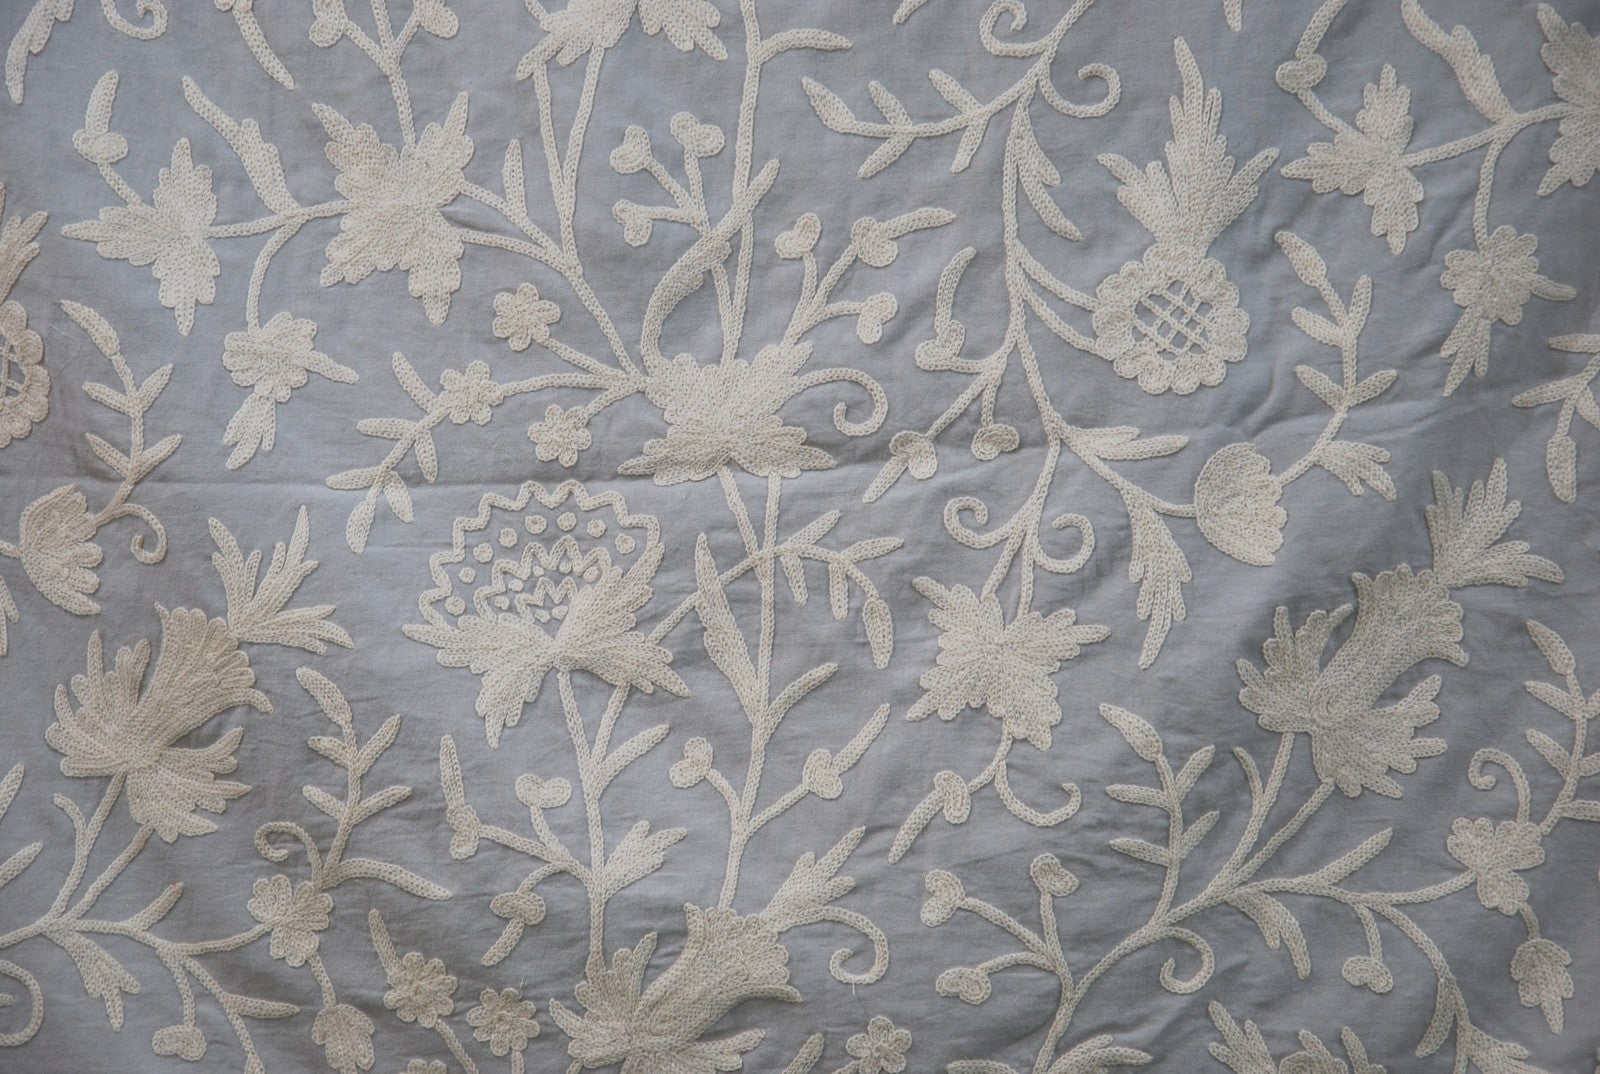 Cotton Crewel Embroidered Fabric, White on Light Grey #FLR452